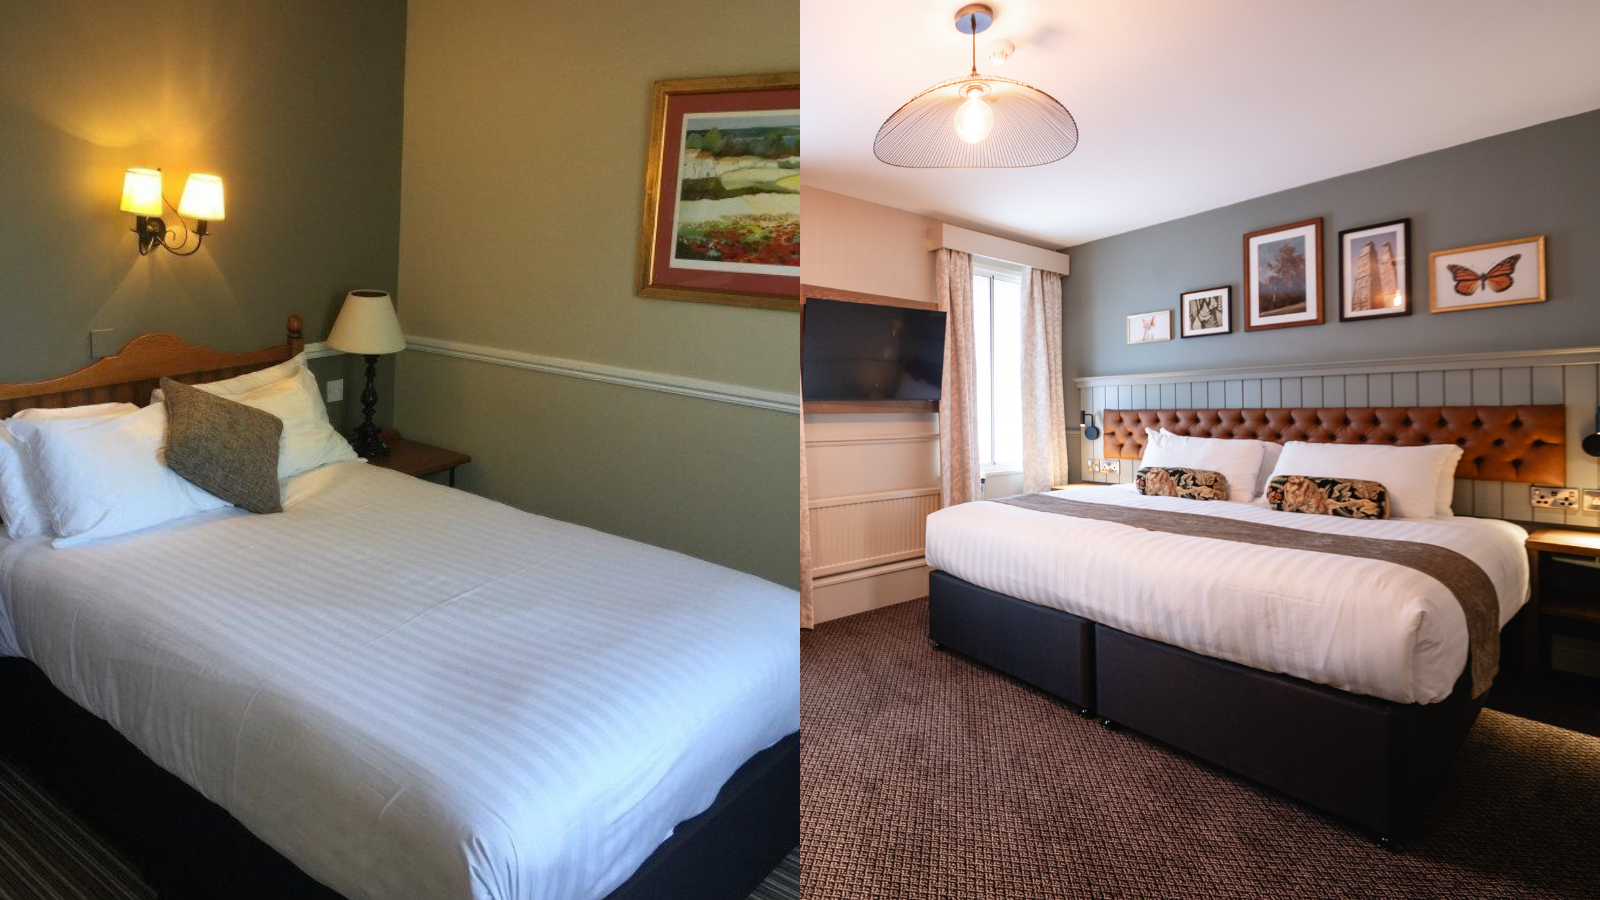 A side by side photo showing a bedroom at the Bears Head before and after refurbishment